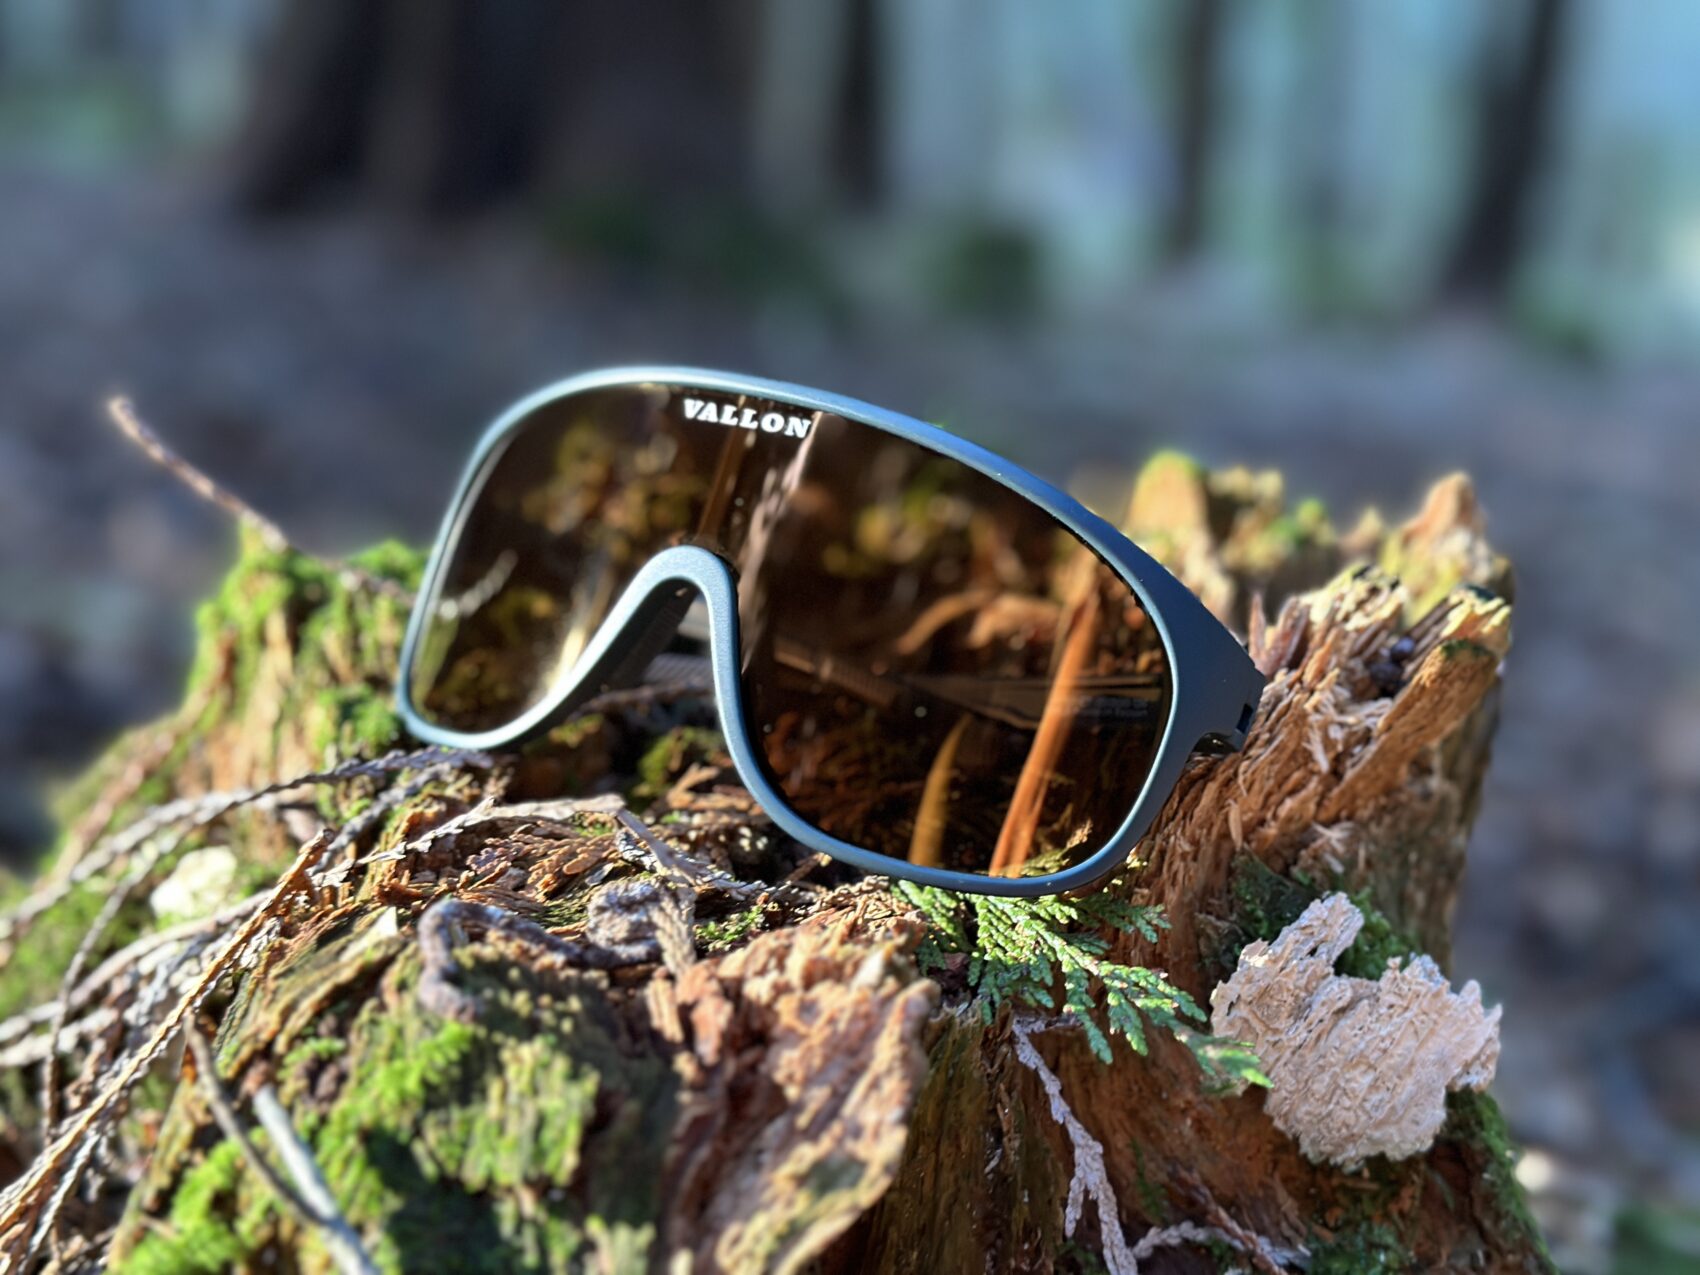 VALLON Watchtower cycling sunglasses review